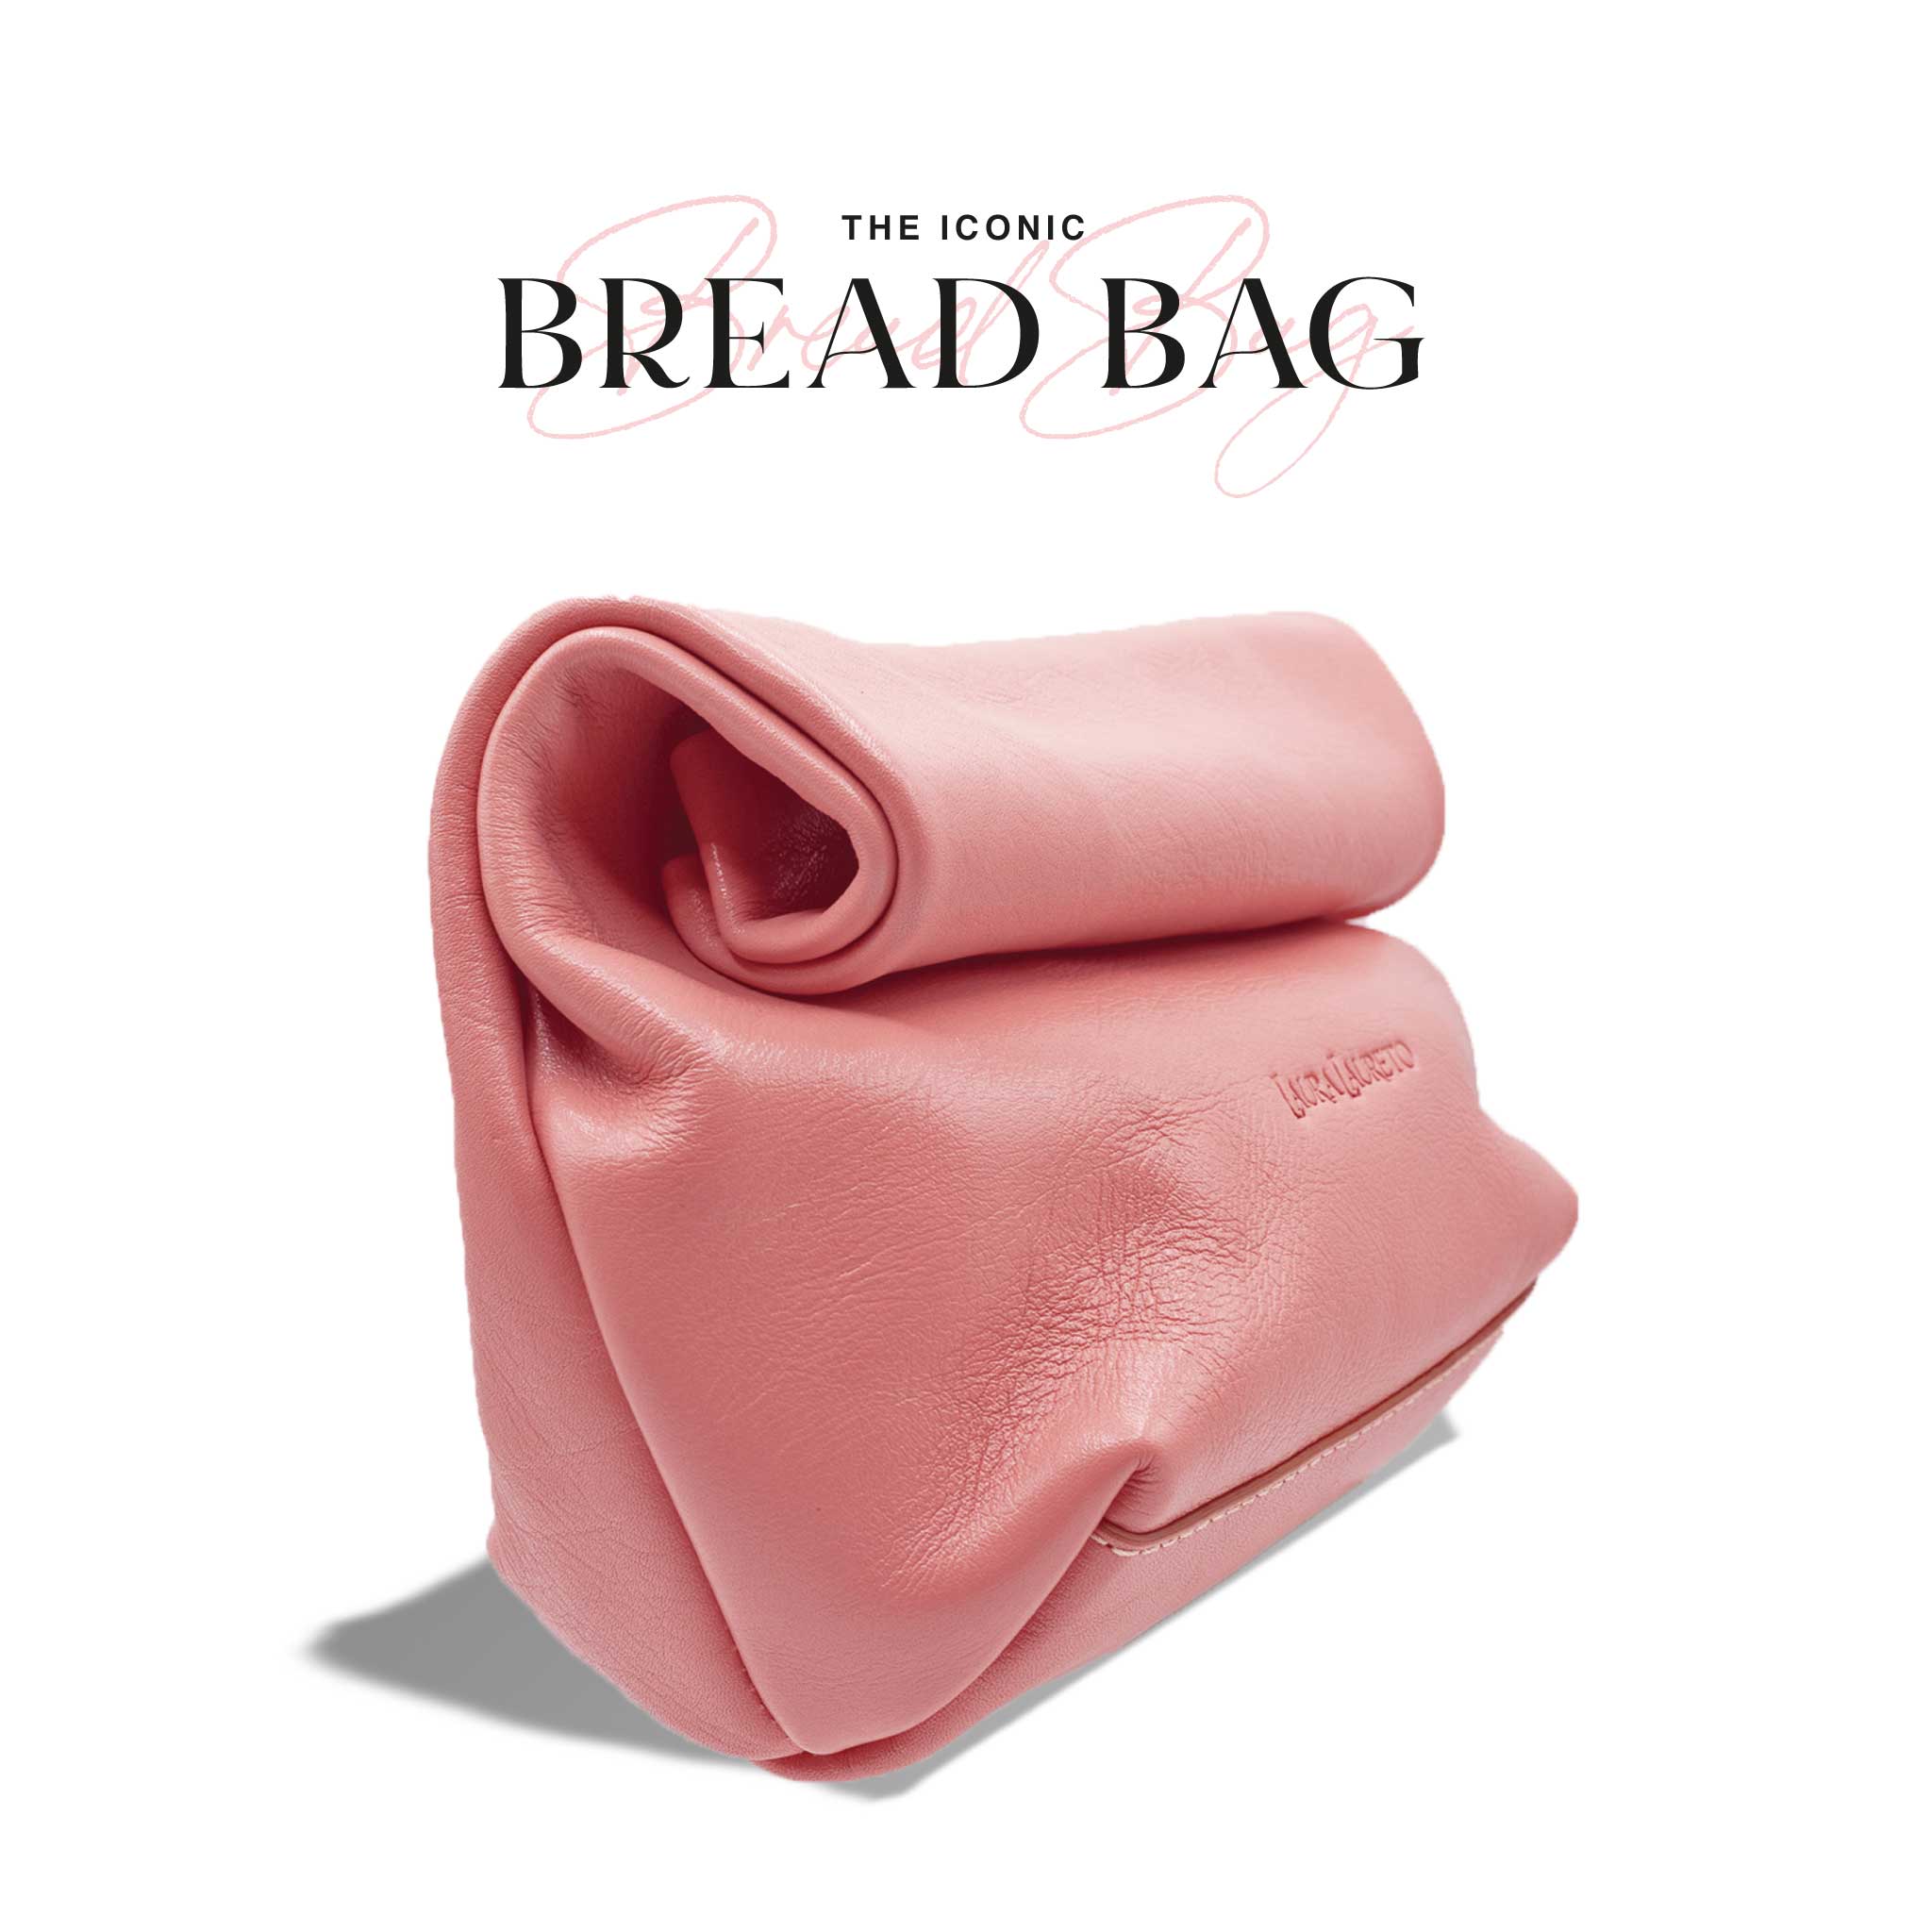 The Iconic Bread Bag®